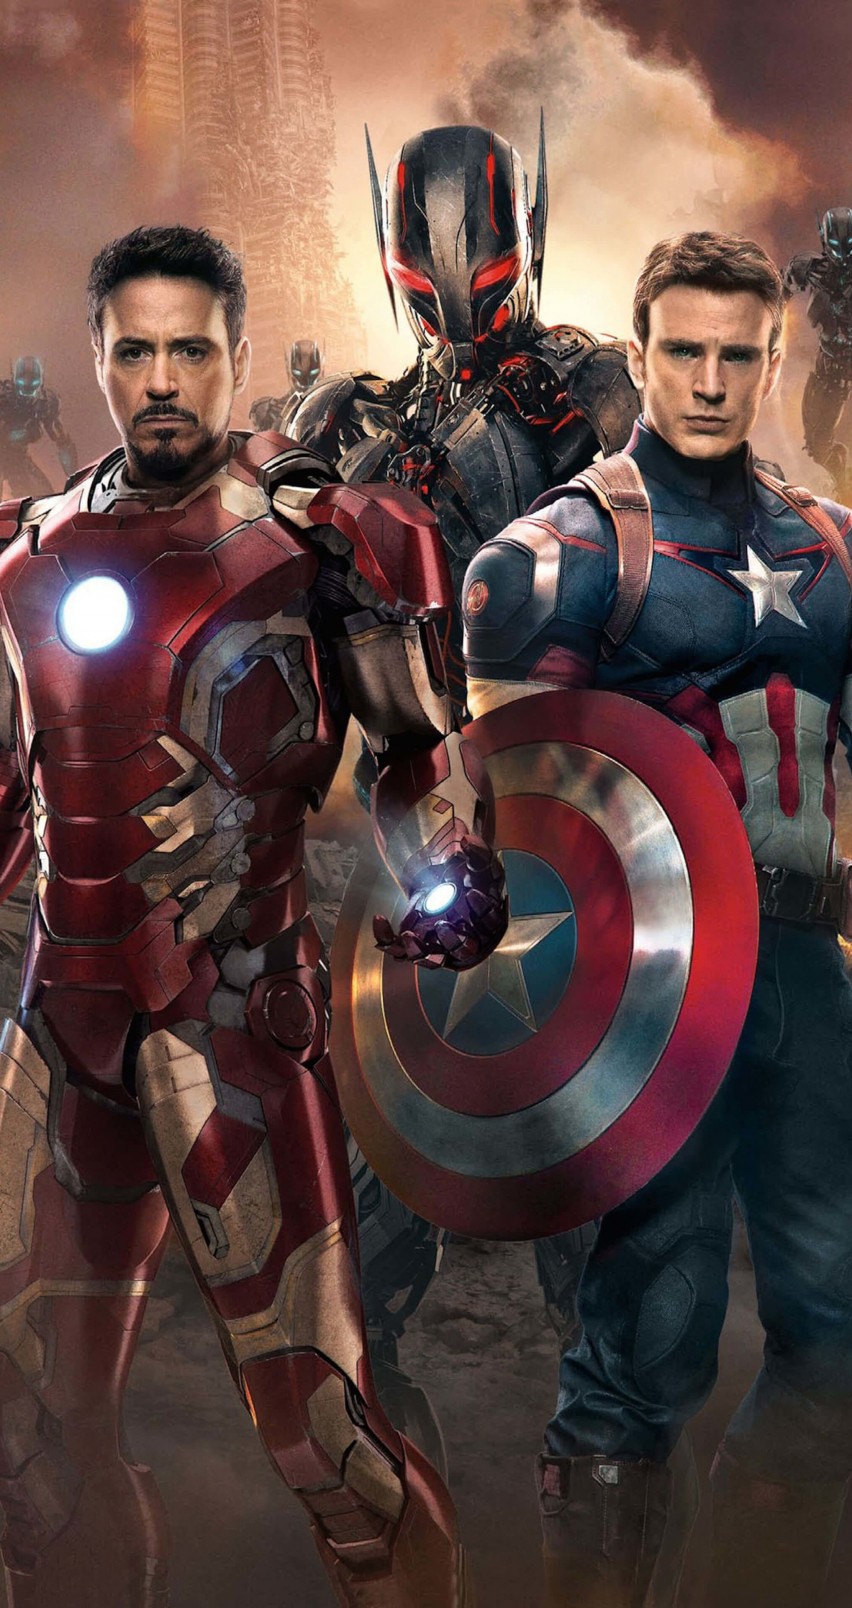 The Avengers: Age of Ultron - Iron Man and Captain America Wallpaper for Apple iPhone 6 / 6s